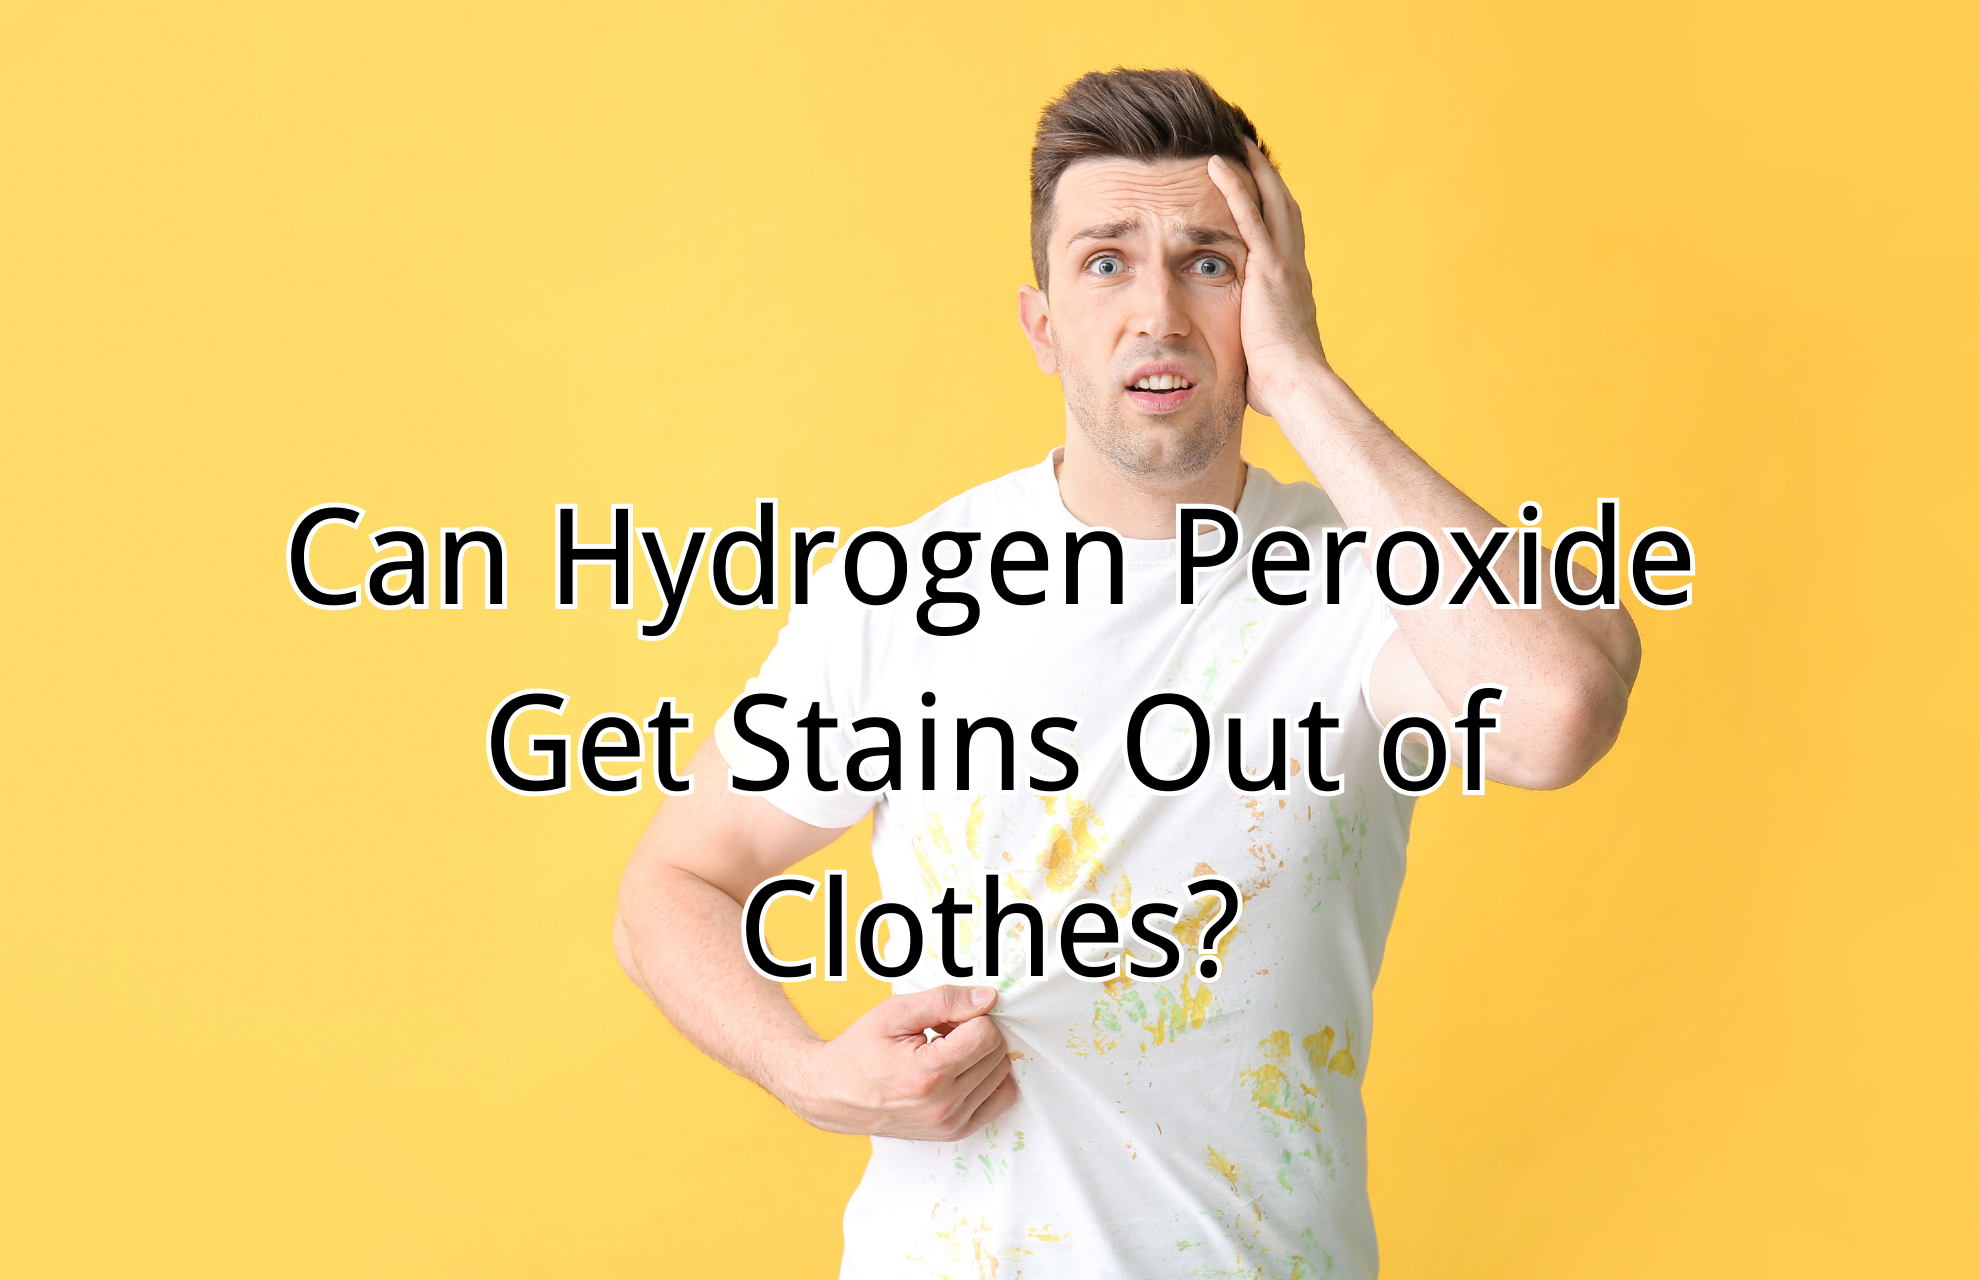 Can Hydrogen Peroxide Get Stains Out of Clothes?